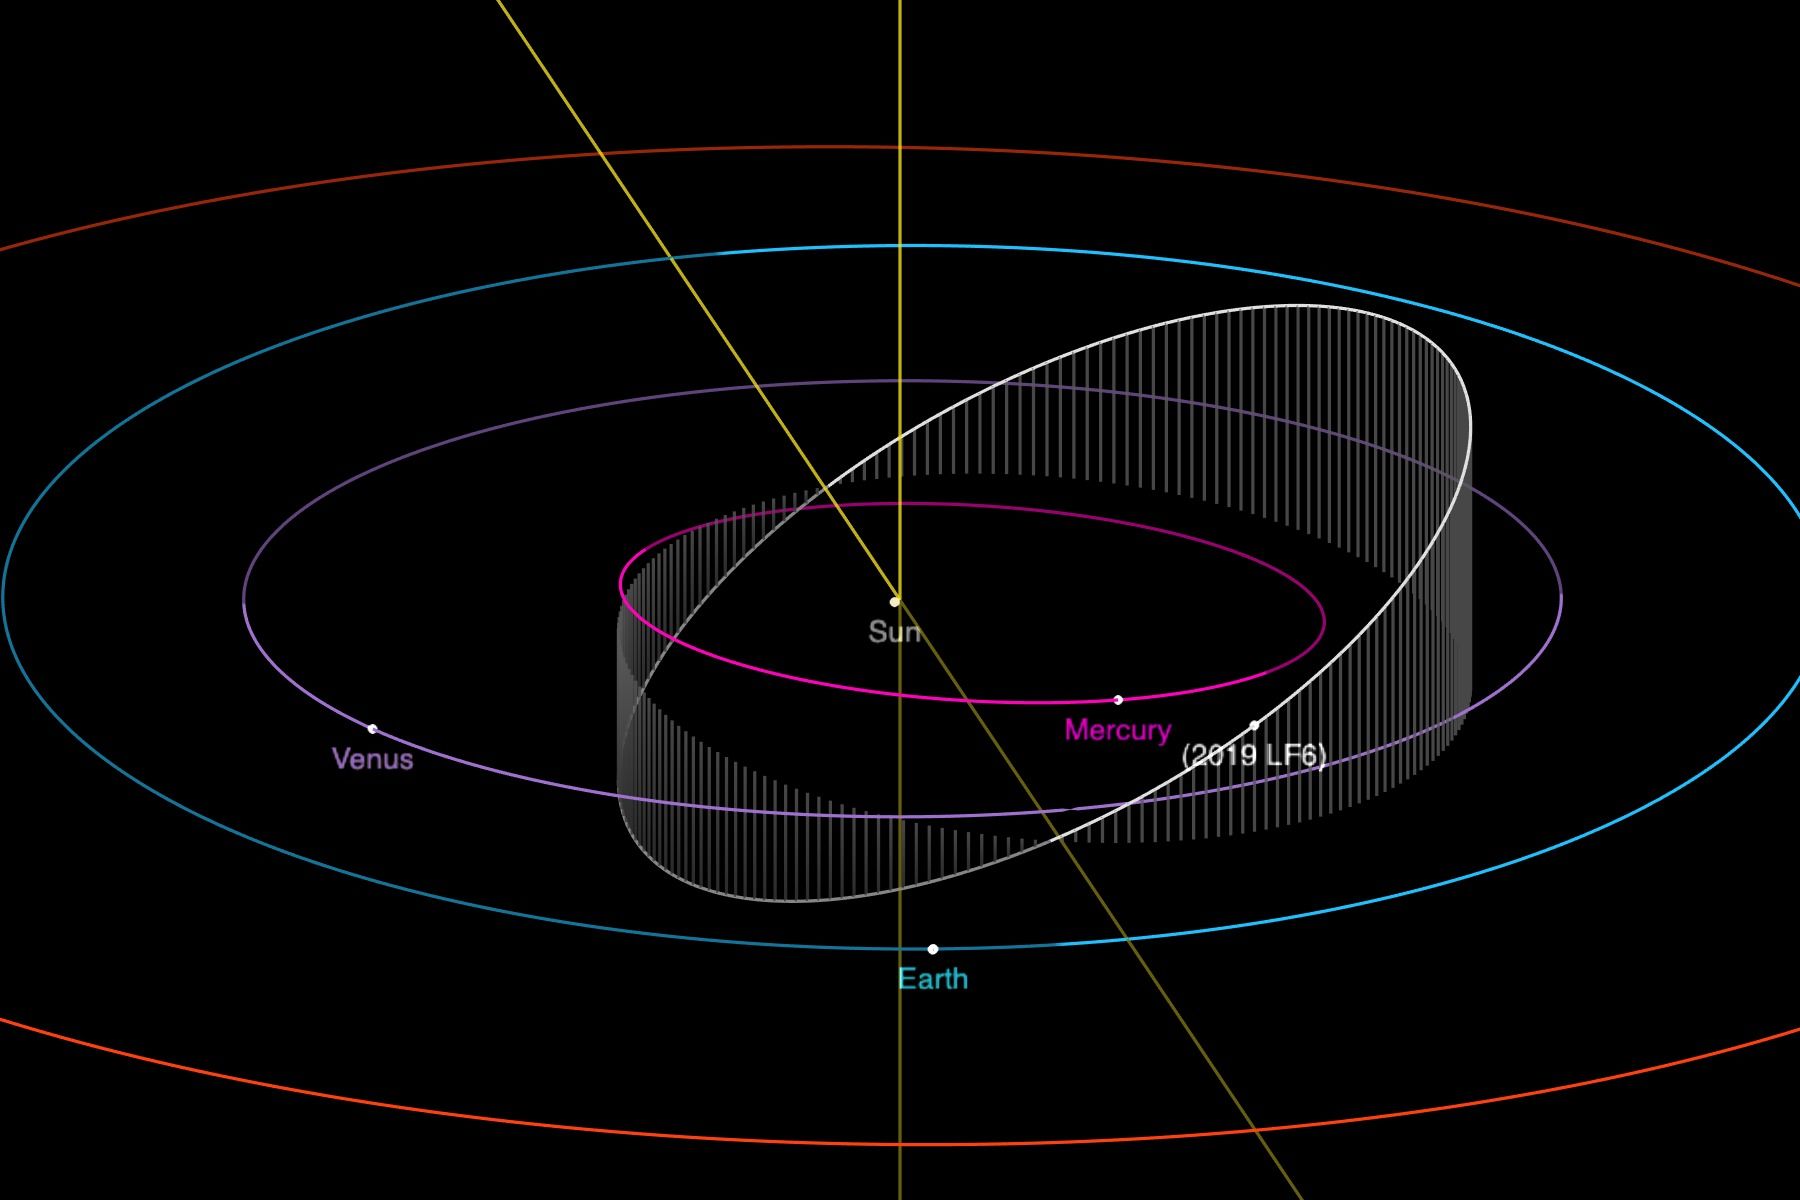 The orbit of the asteroid 2019 LF6 around the Sun takes it closer than Mercury and just farther out than Venus. Credit: NASA/JPL-Caltech